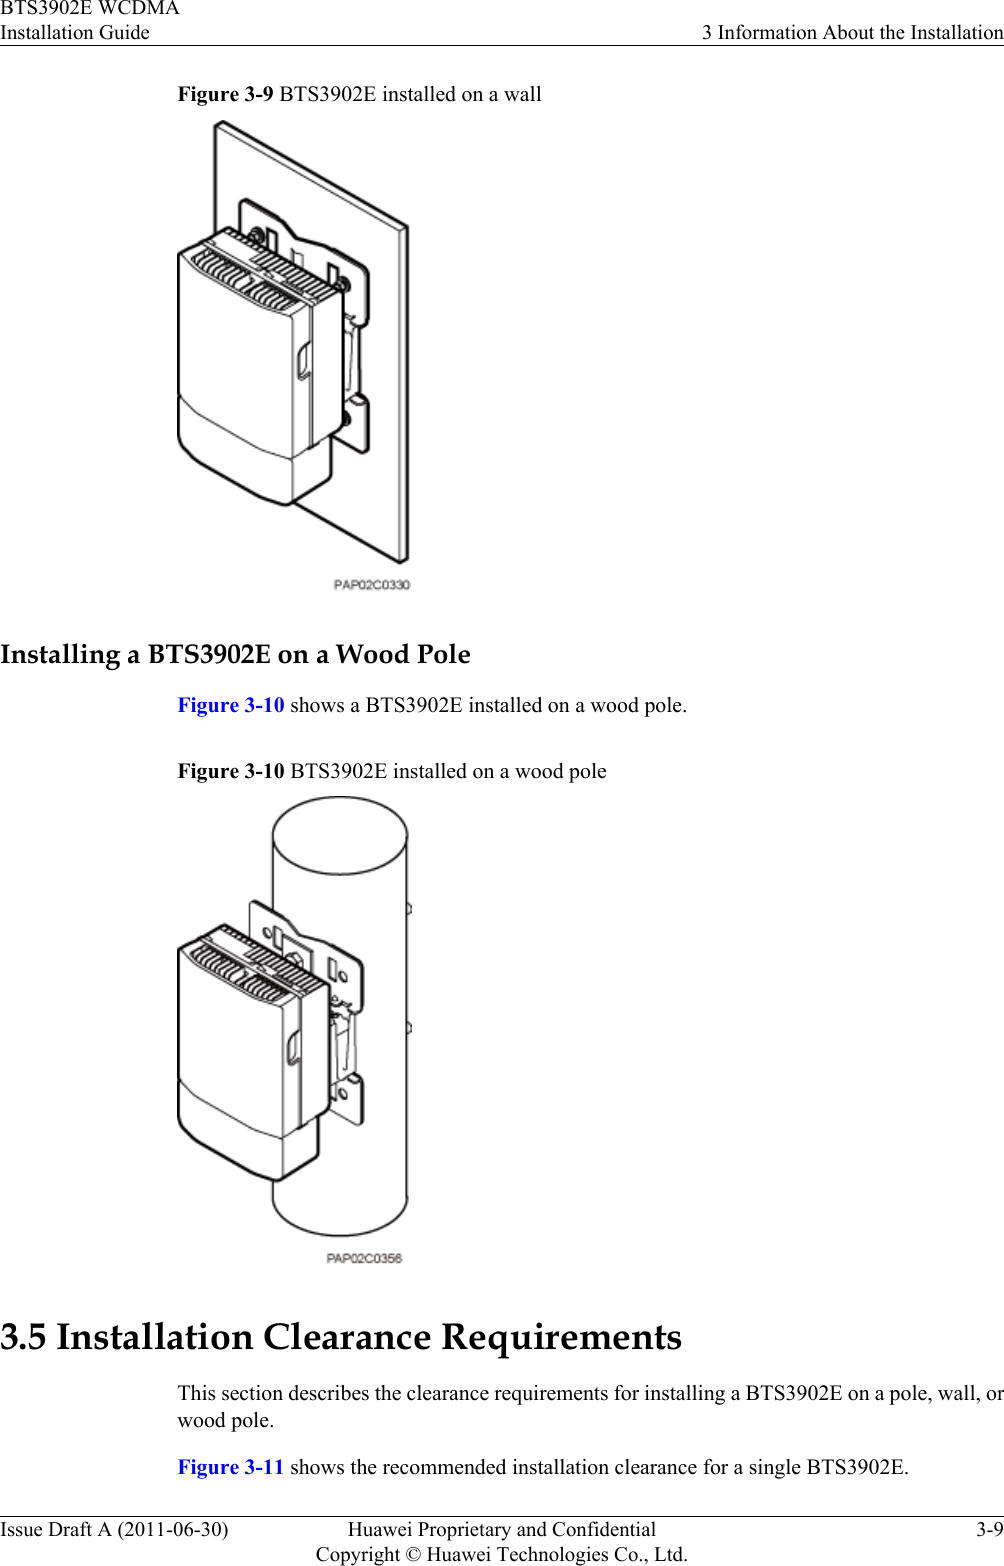 Figure 3-9 BTS3902E installed on a wallInstalling a BTS3902E on a Wood PoleFigure 3-10 shows a BTS3902E installed on a wood pole.Figure 3-10 BTS3902E installed on a wood pole3.5 Installation Clearance RequirementsThis section describes the clearance requirements for installing a BTS3902E on a pole, wall, orwood pole.Figure 3-11 shows the recommended installation clearance for a single BTS3902E.BTS3902E WCDMAInstallation Guide 3 Information About the InstallationIssue Draft A (2011-06-30) Huawei Proprietary and ConfidentialCopyright © Huawei Technologies Co., Ltd.3-9